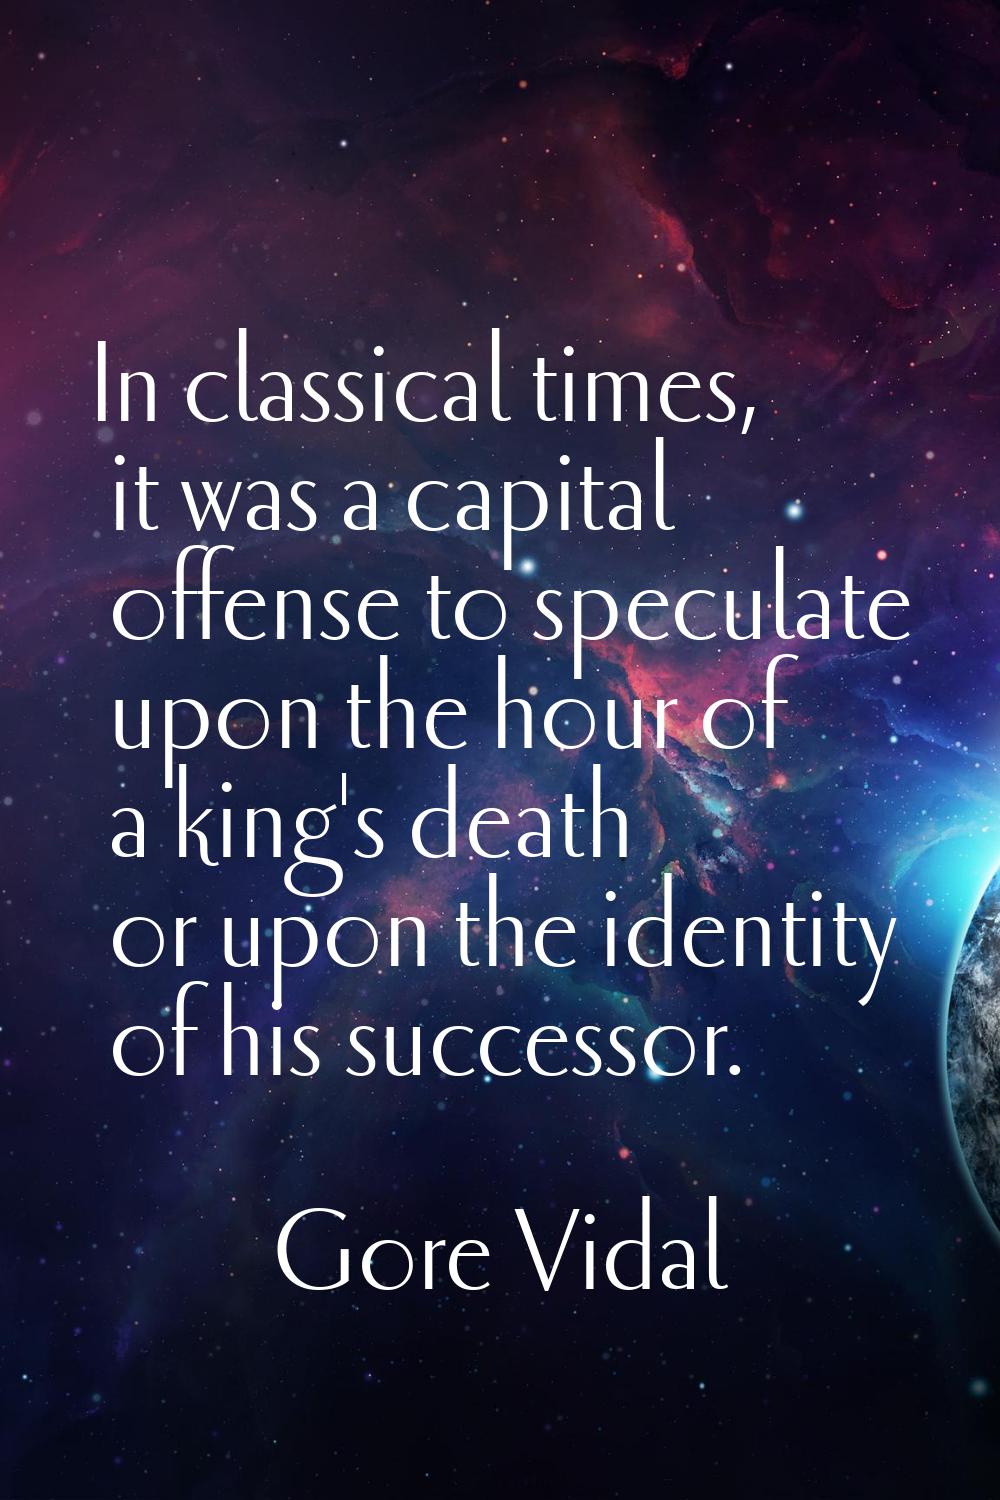 In classical times, it was a capital offense to speculate upon the hour of a king's death or upon t